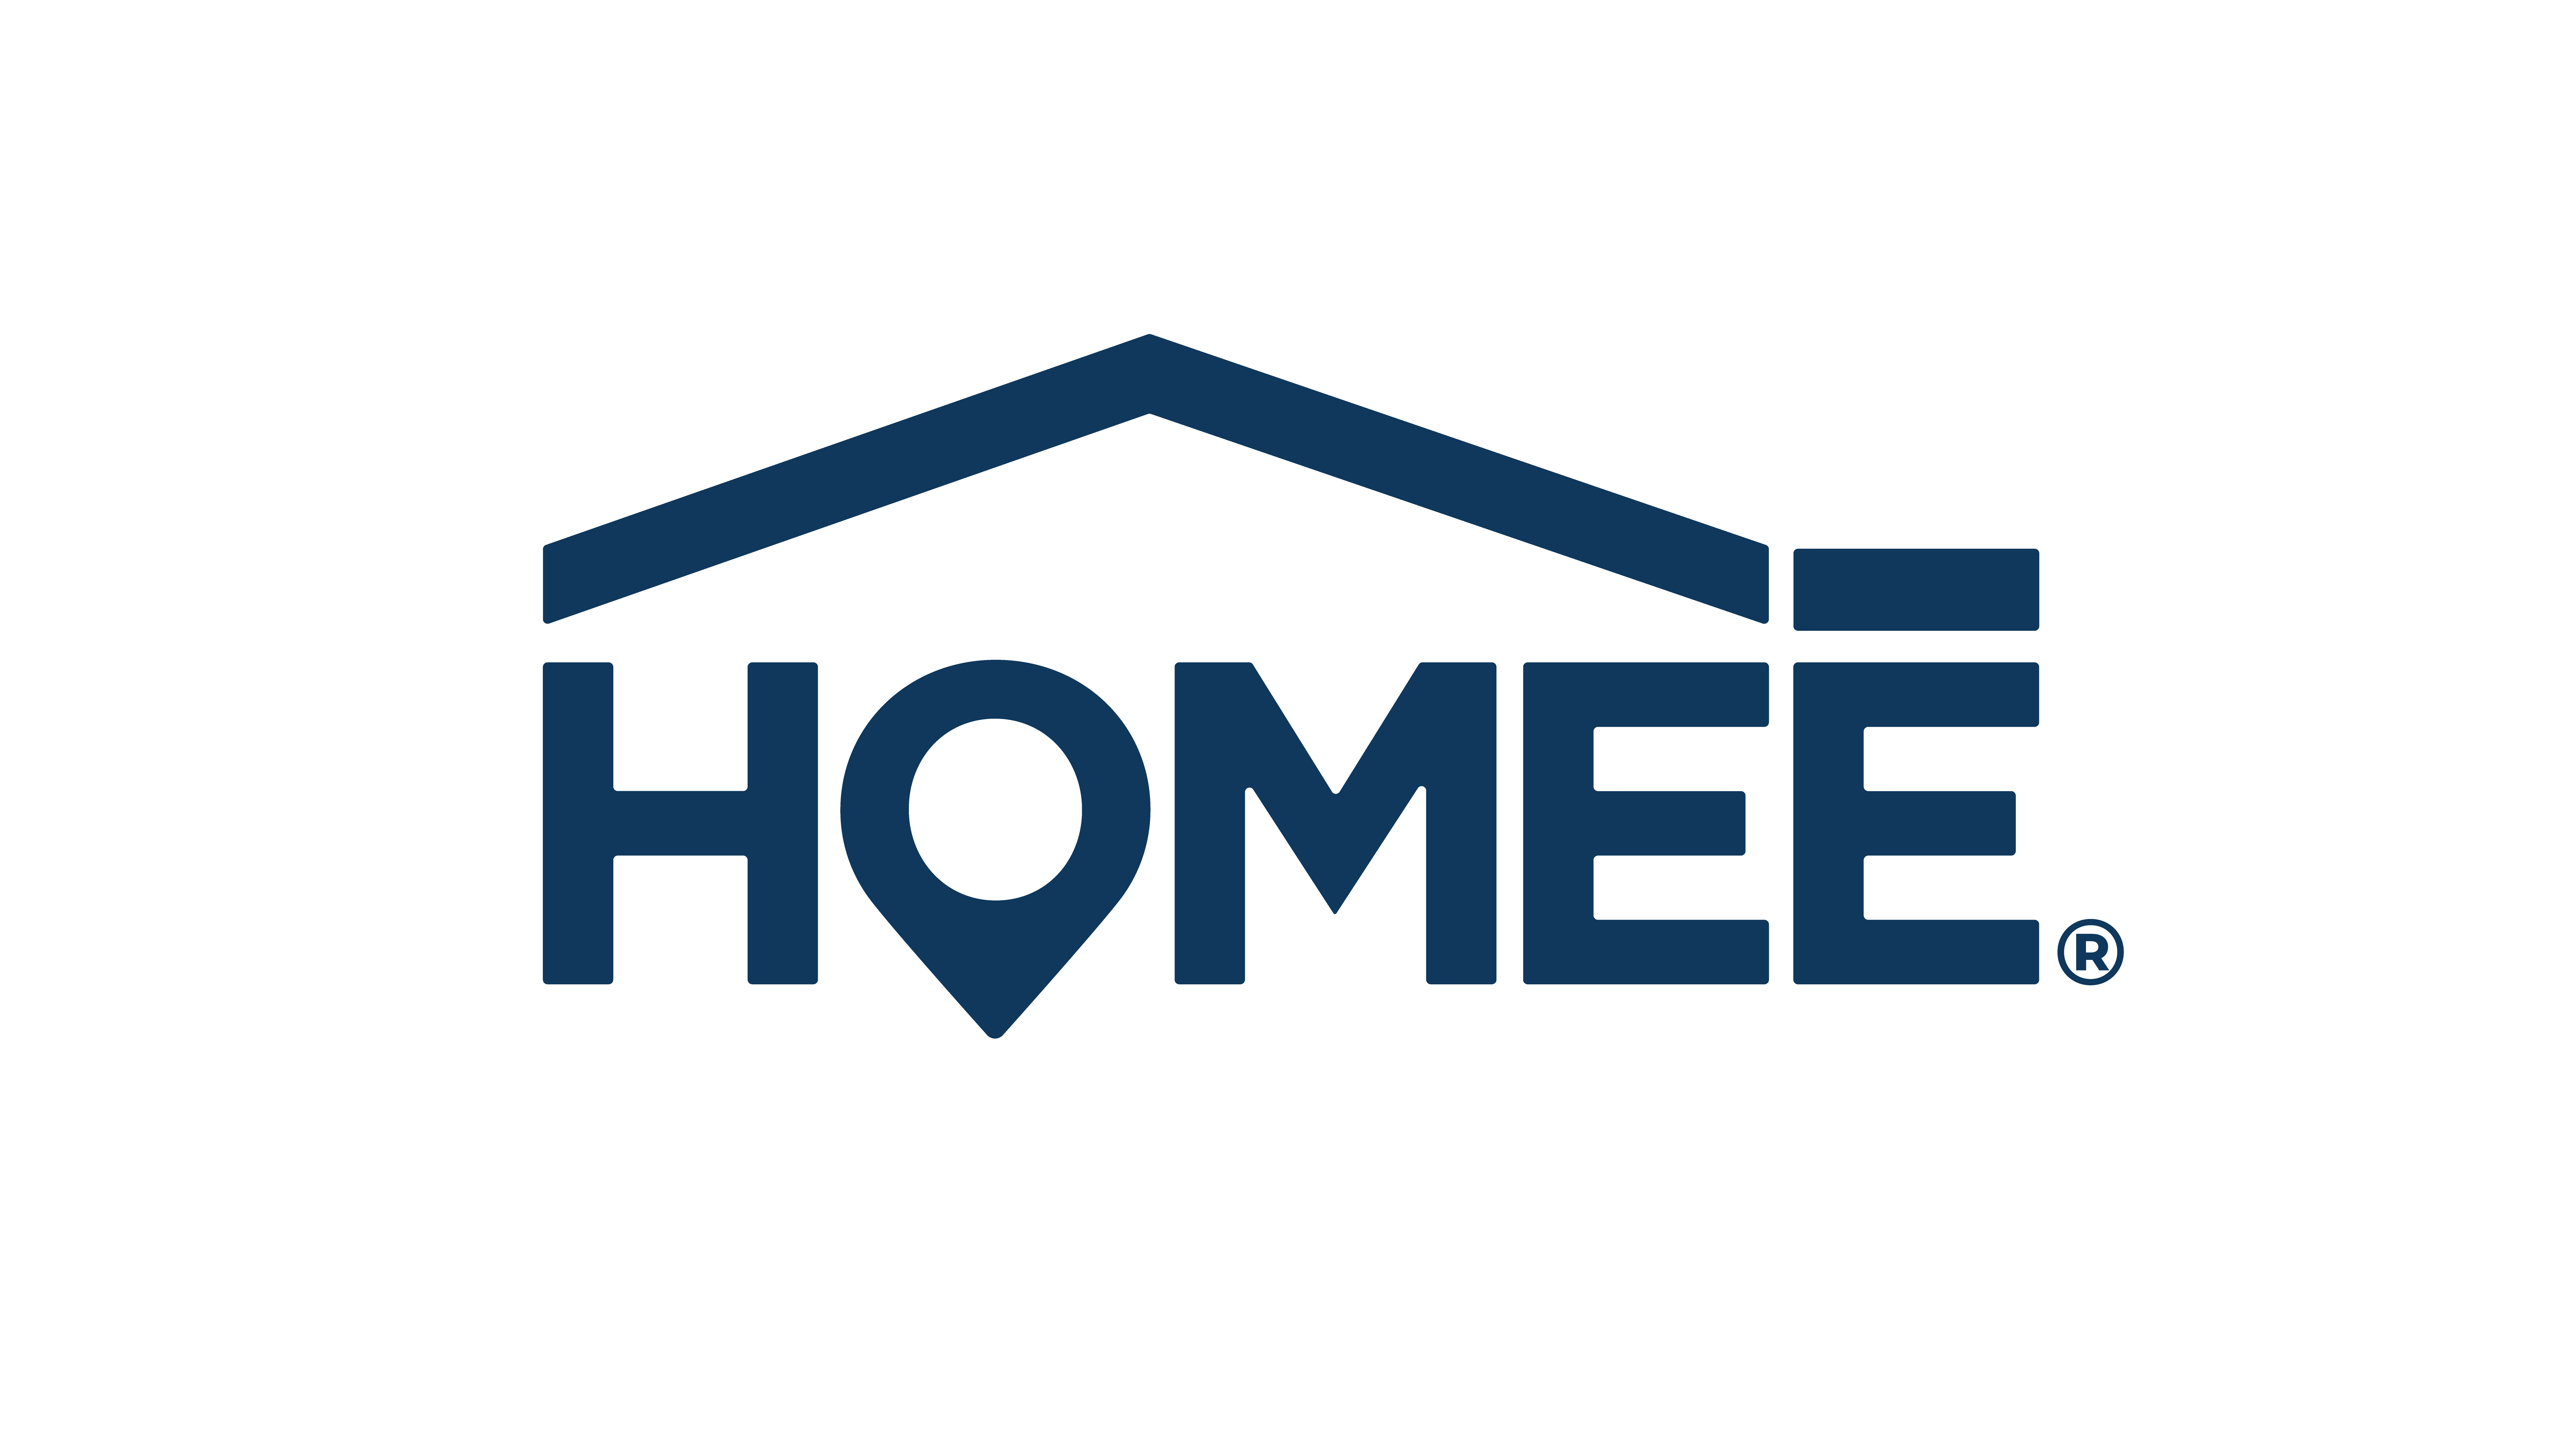 HOMEE Adds Estimate Feature to On-Demand Home Service App